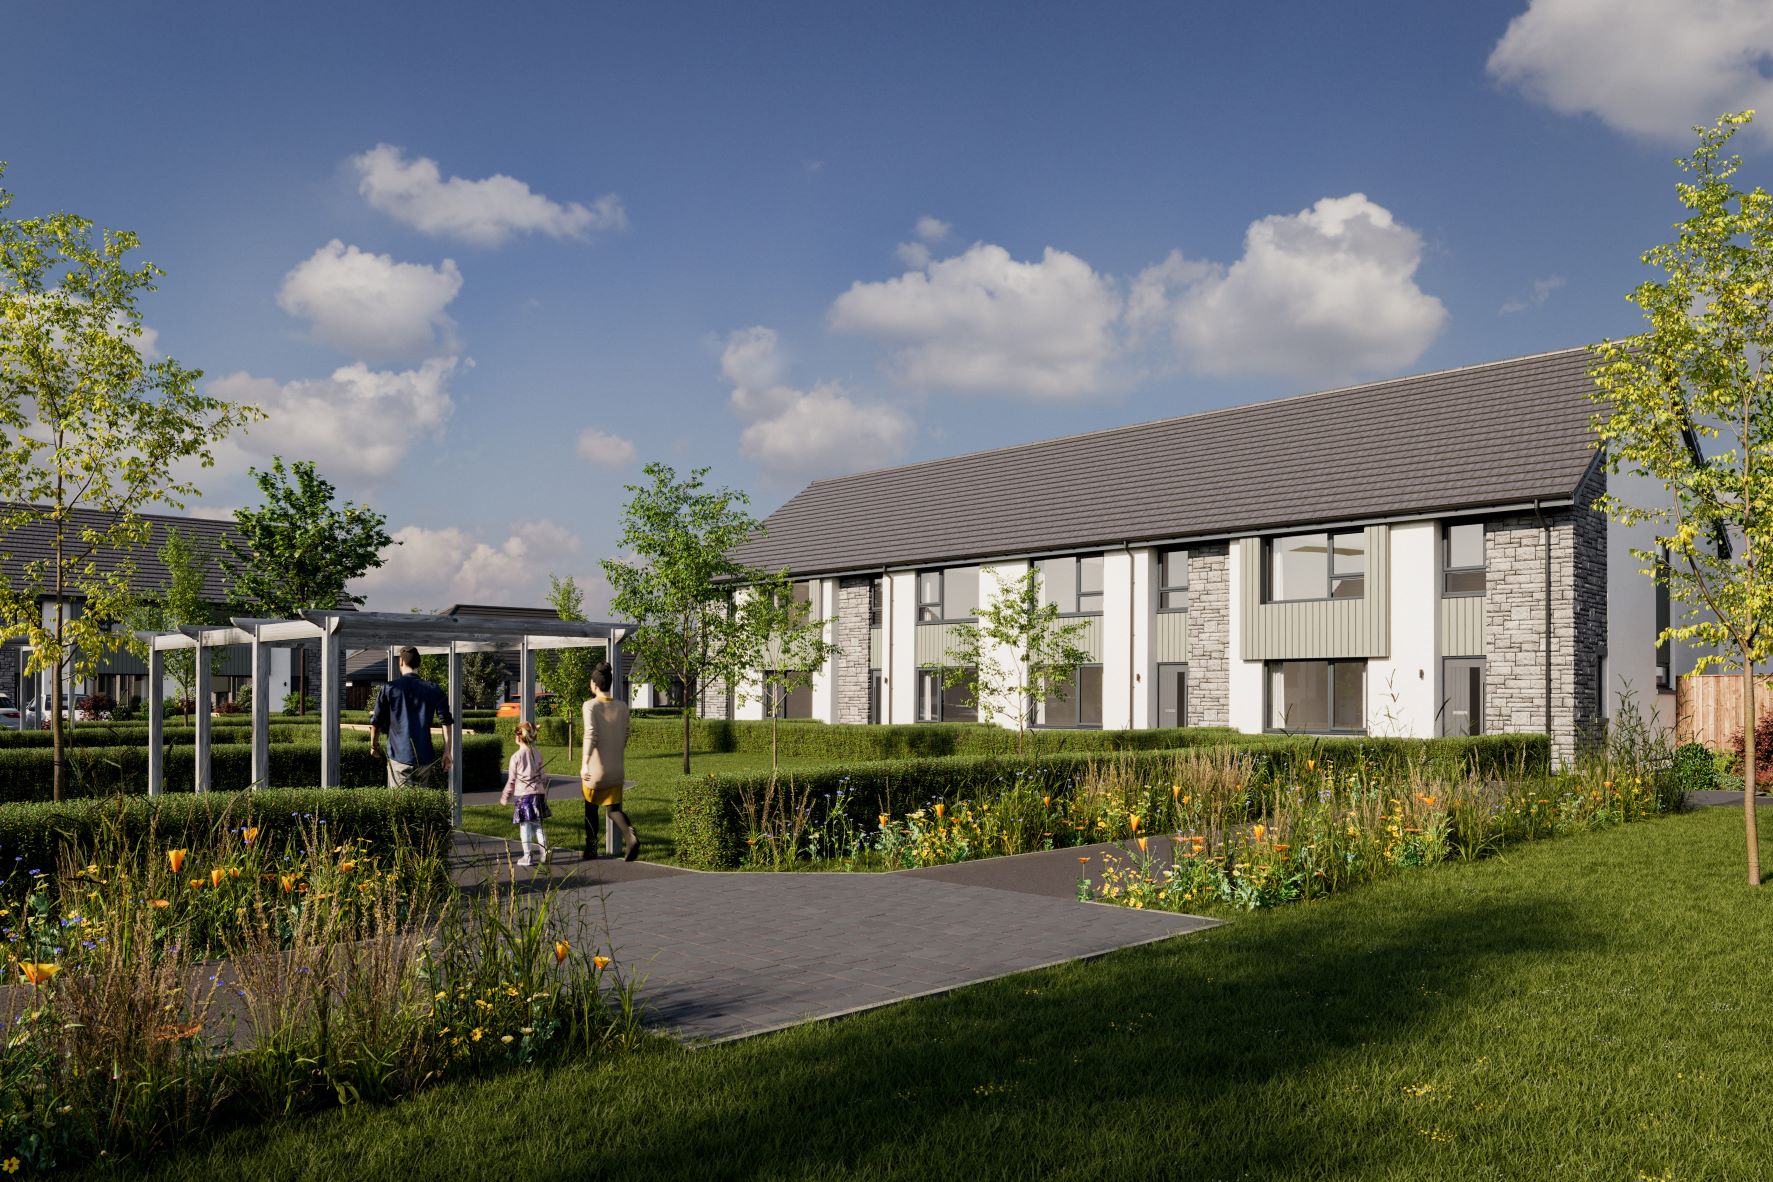 Cala Homes secures purchase of Killearn Hospital site